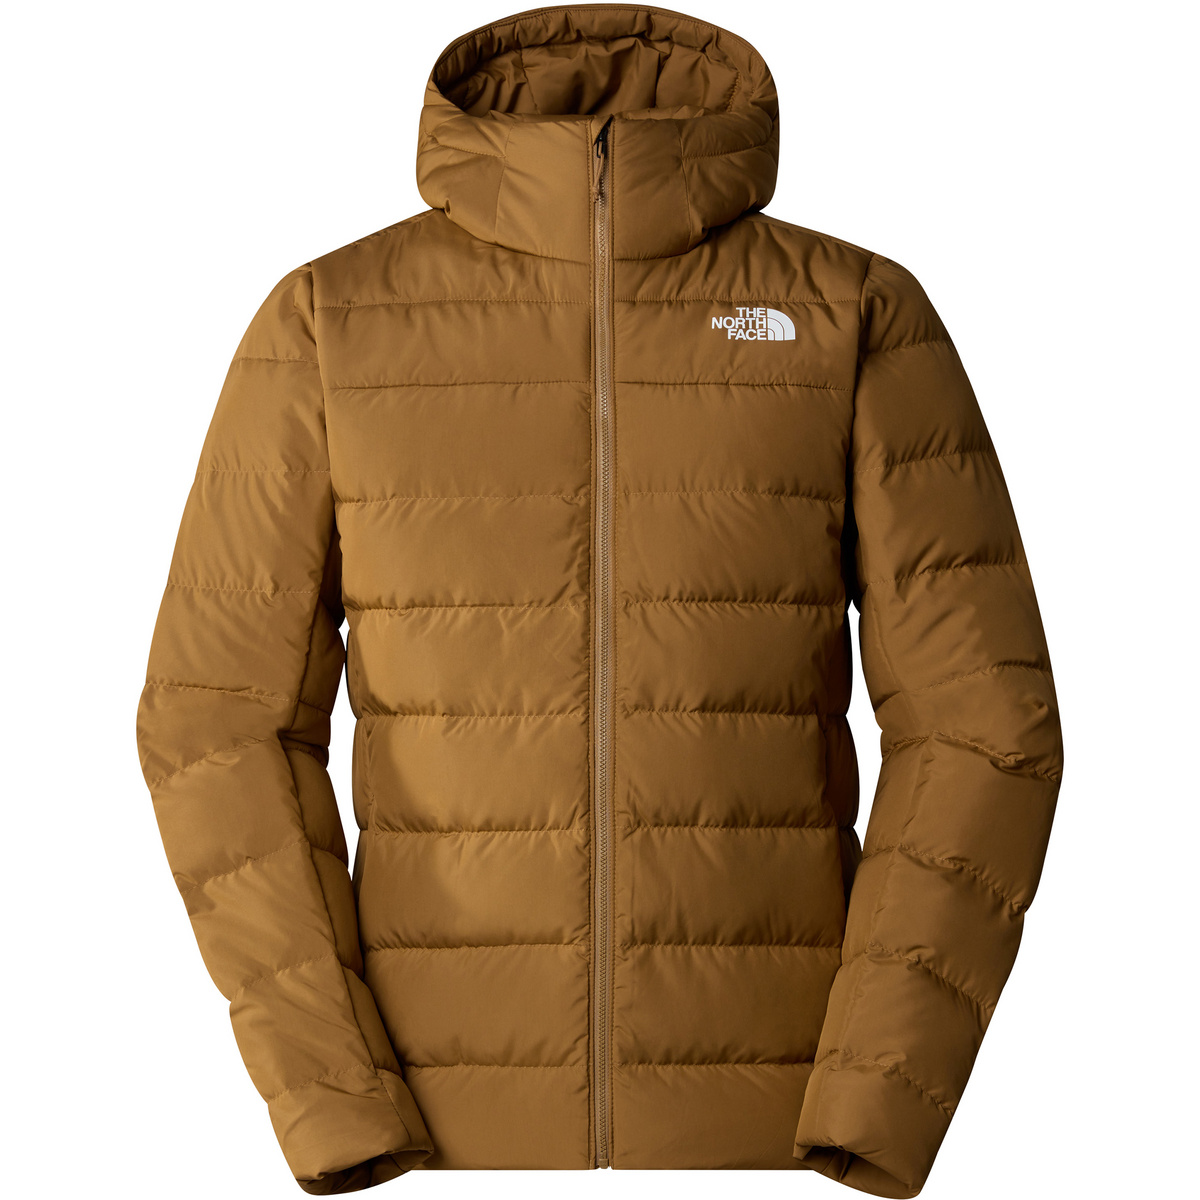 The North Face Herren Aconcagua 3 Hoodie Jacke von The North Face